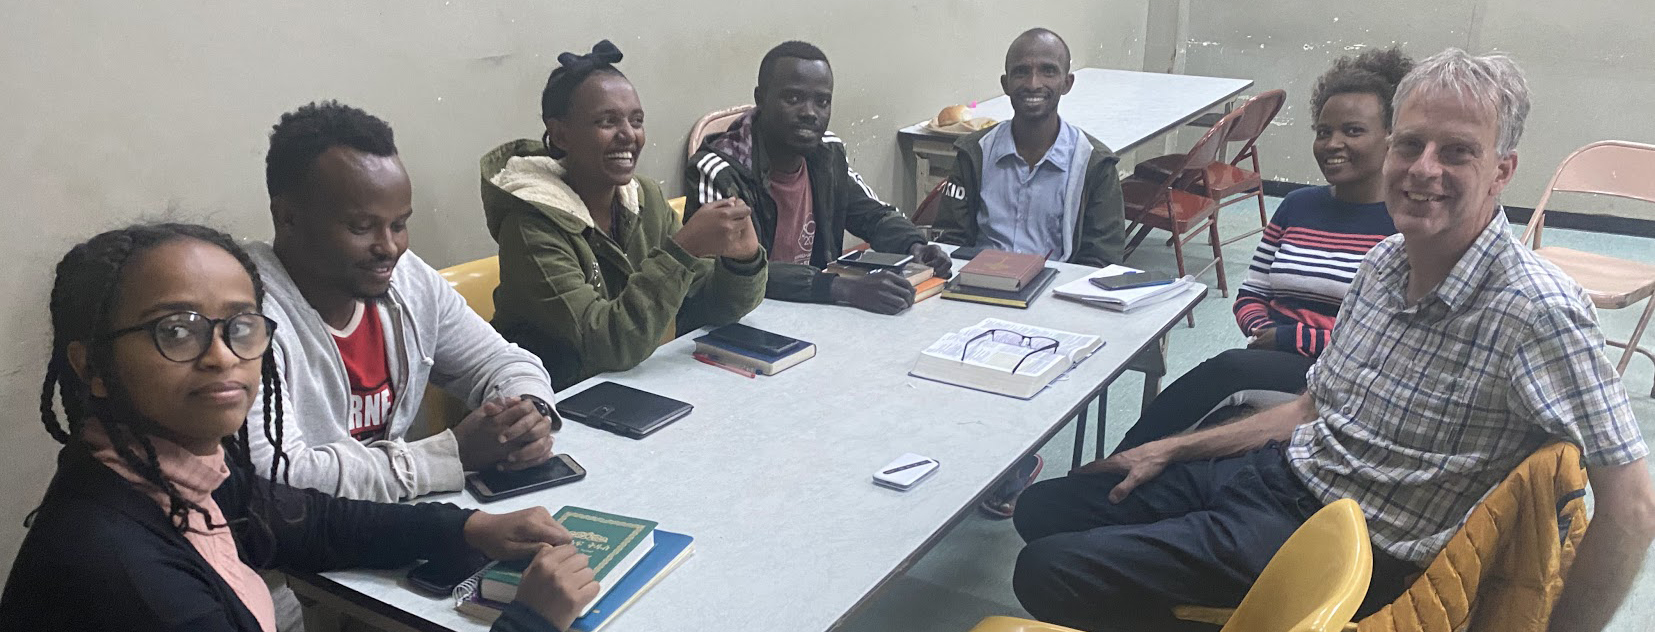 Students in Ethiopia sitting at table with their teacher